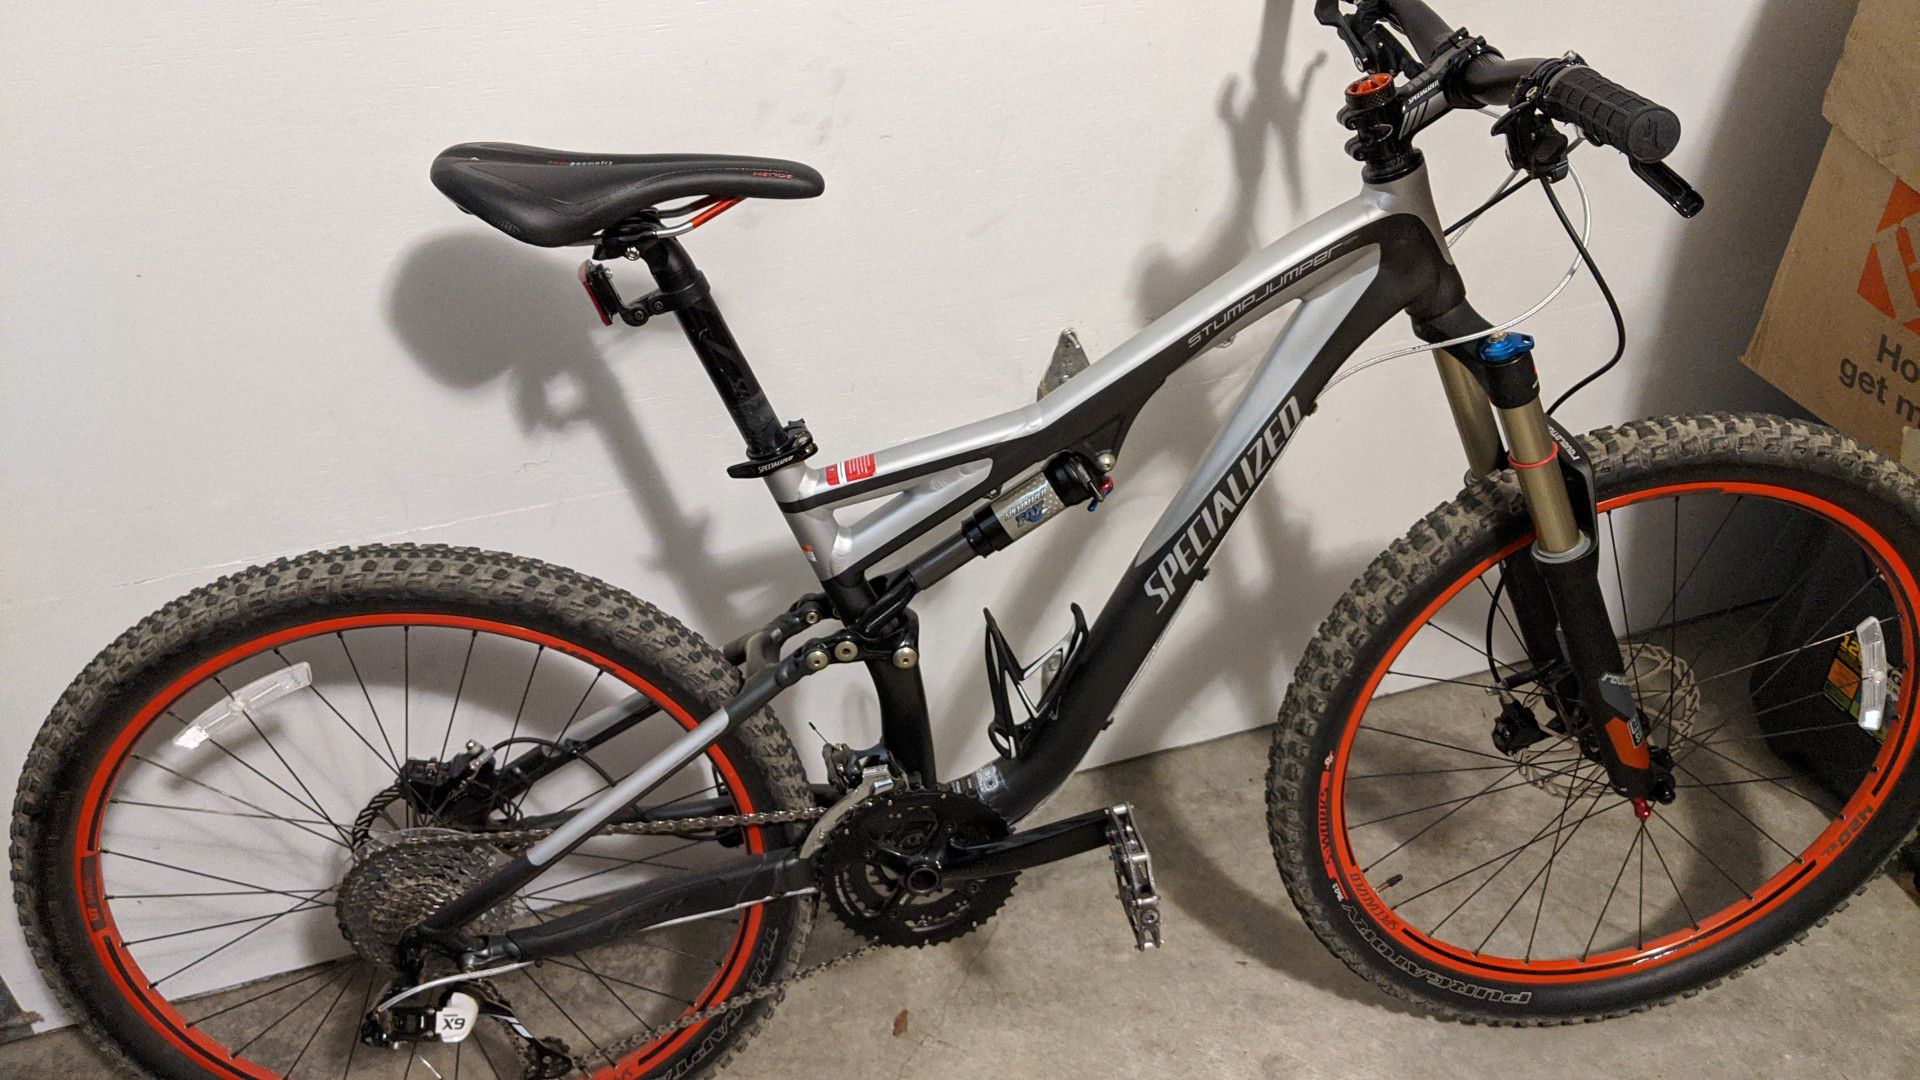 Specialized Stumpjumper full suspension hydraulic brakes mountain bike -SOLD pending pick up